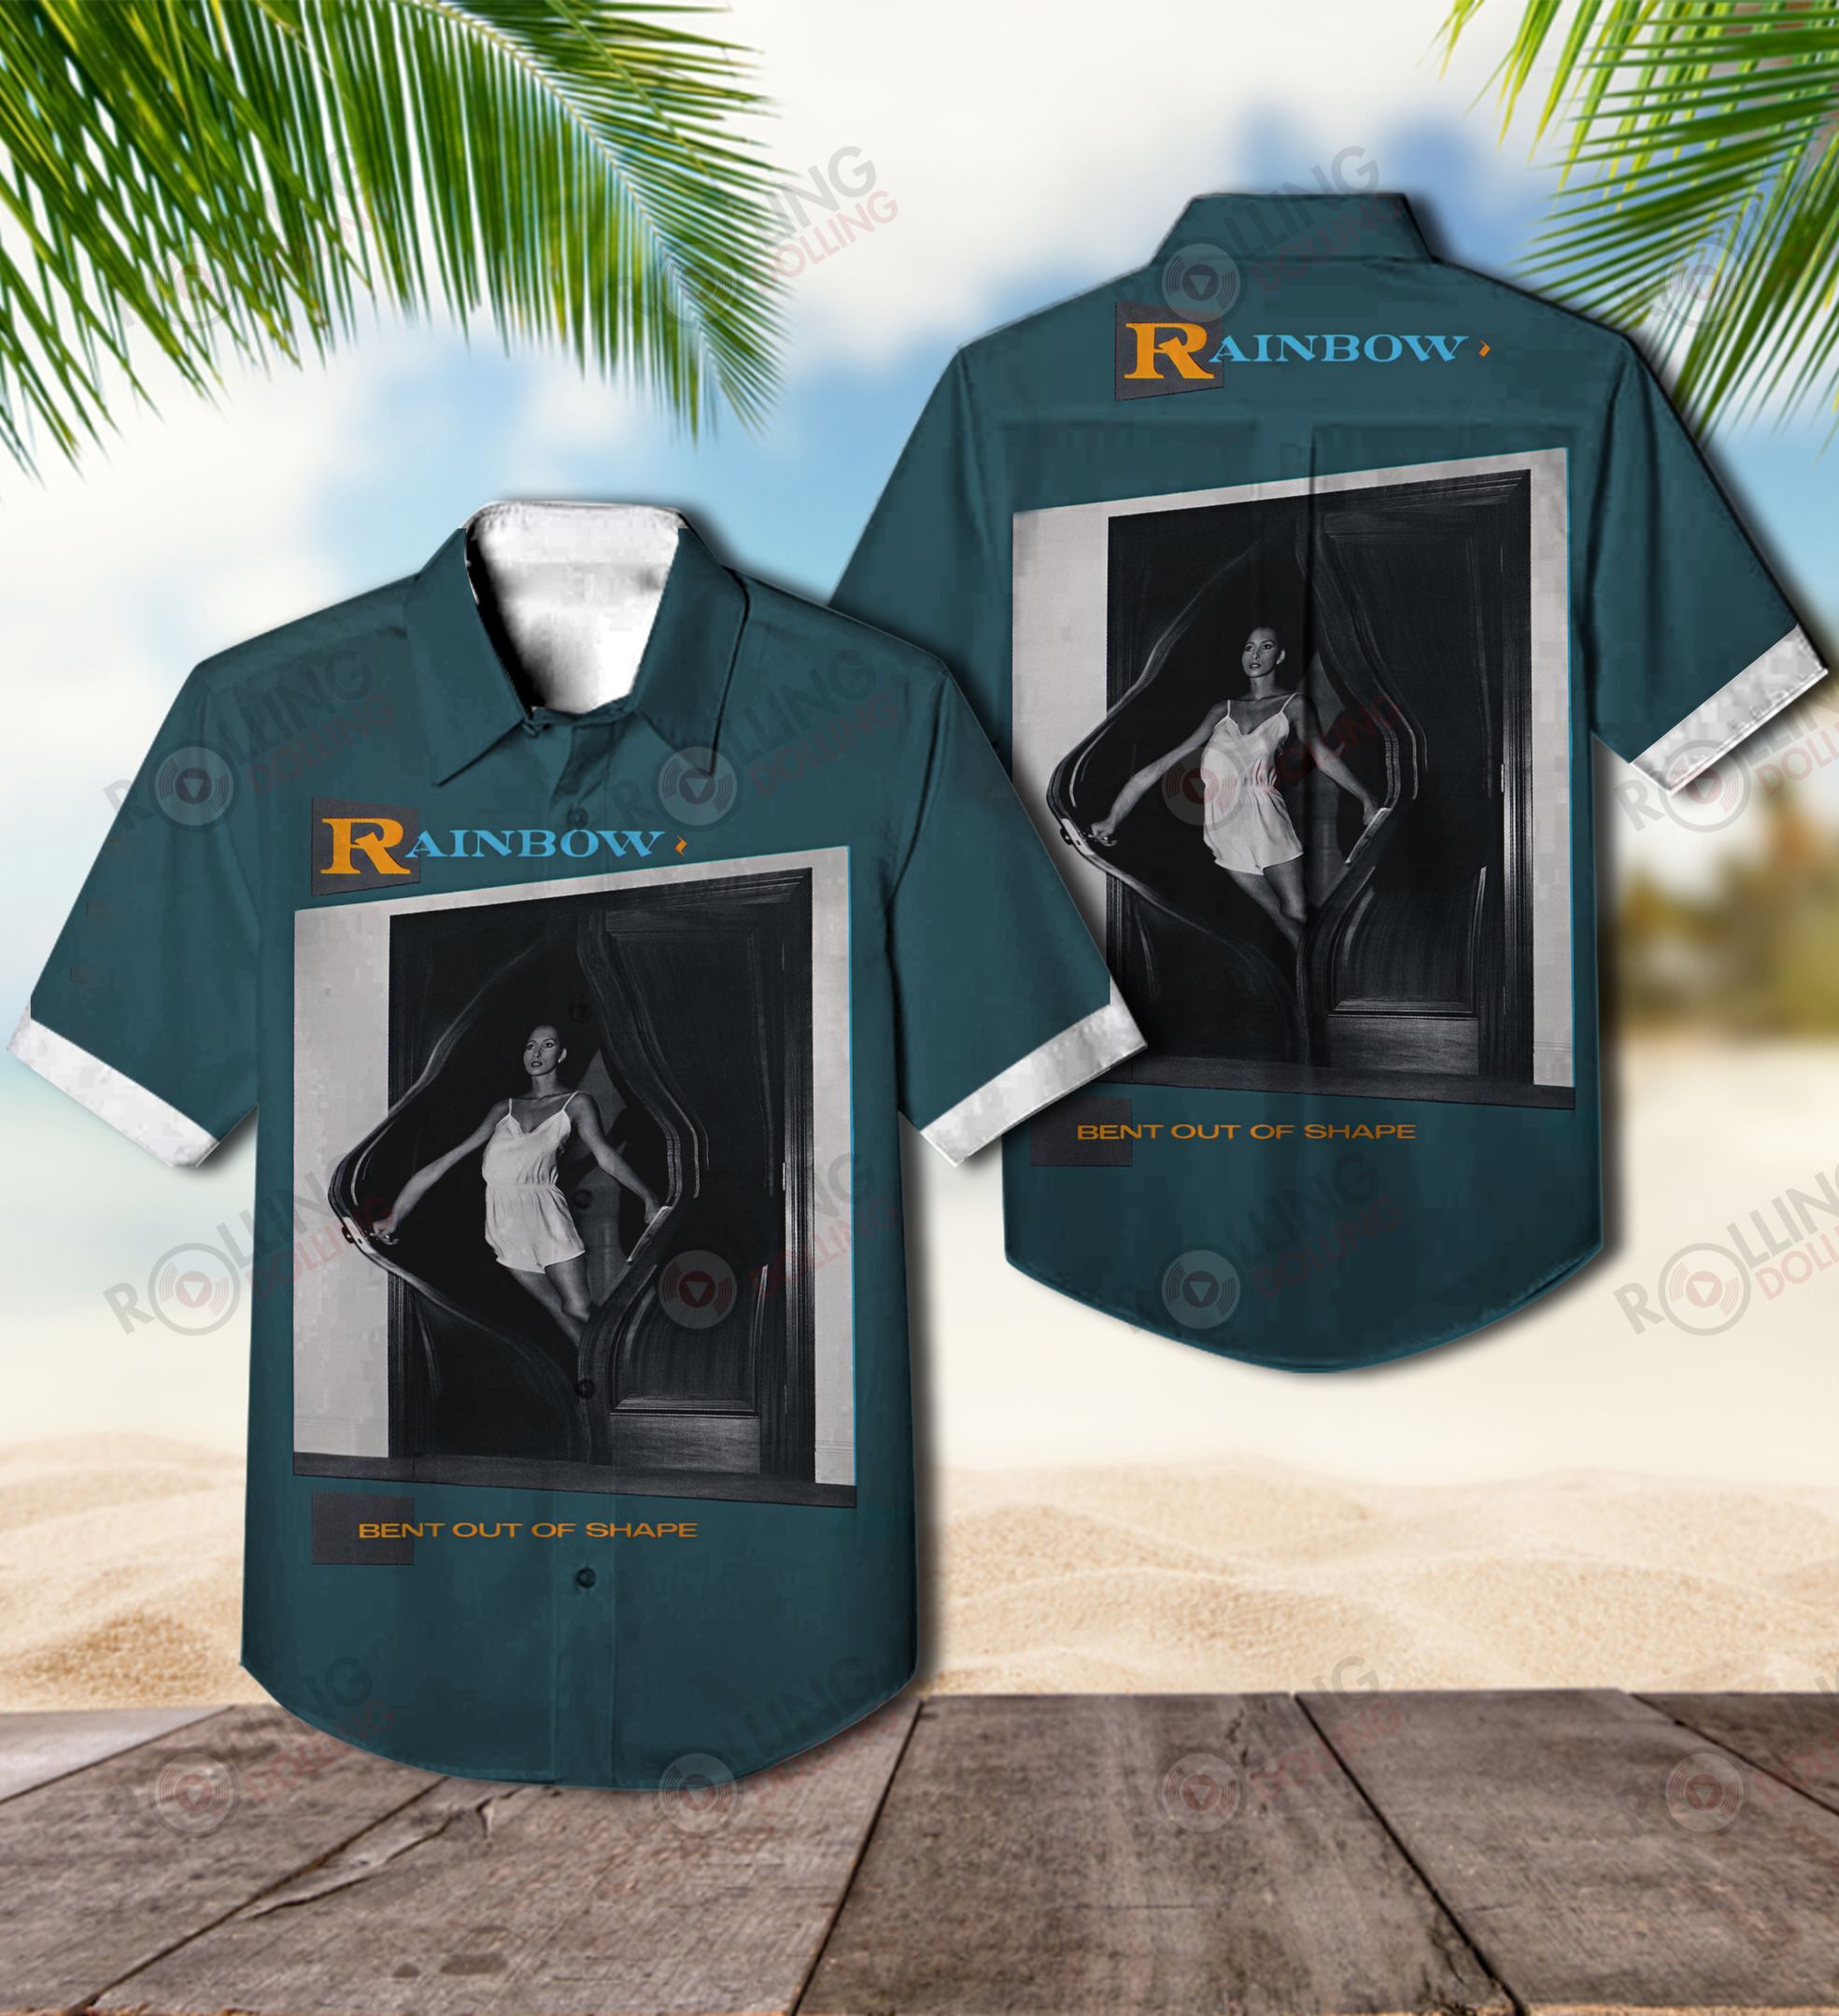 This would make a great gift for any fan who loves Hawaiian Shirt as well as Rock band 4